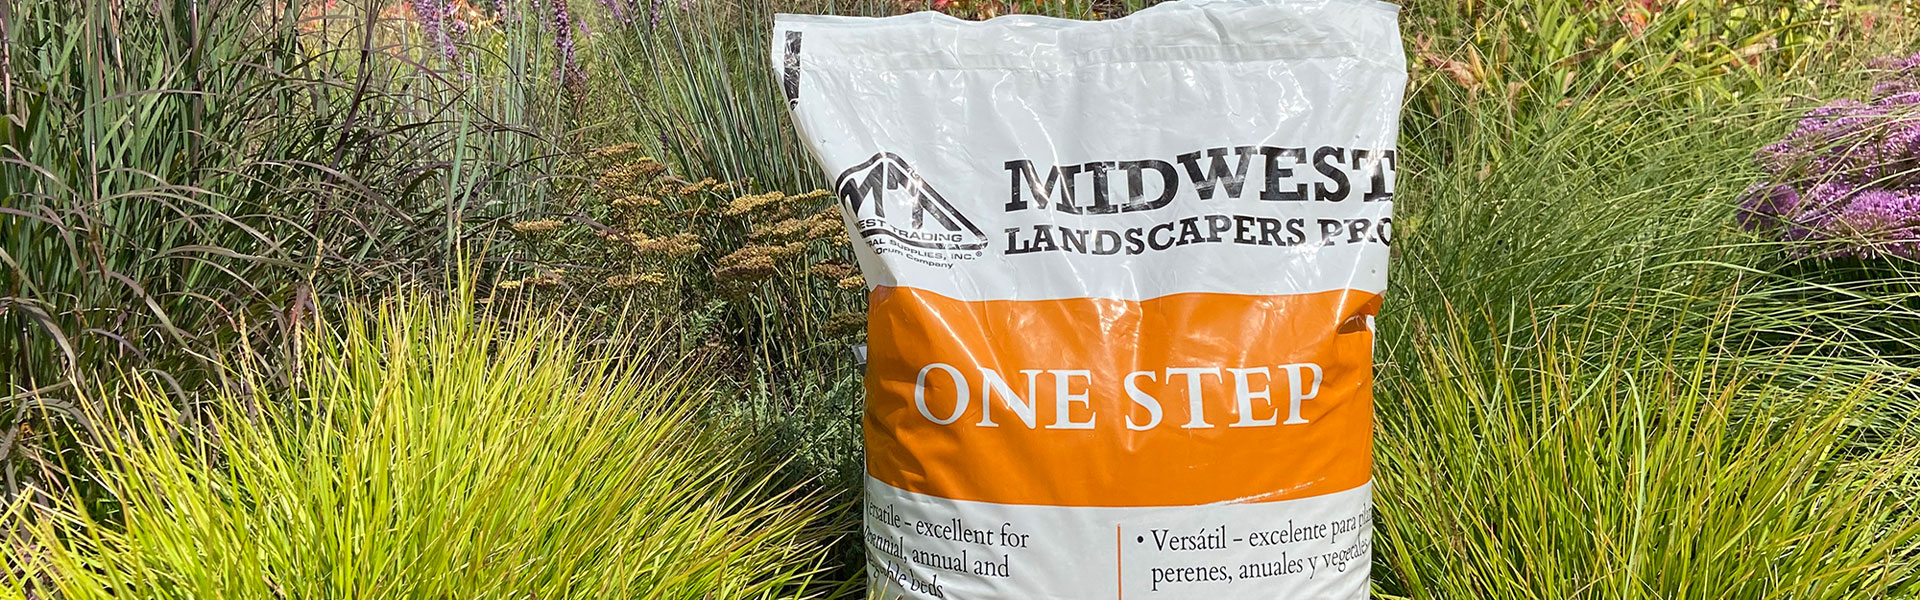 IGC and Rewholesalers 8211 Midwest Landscapers pro